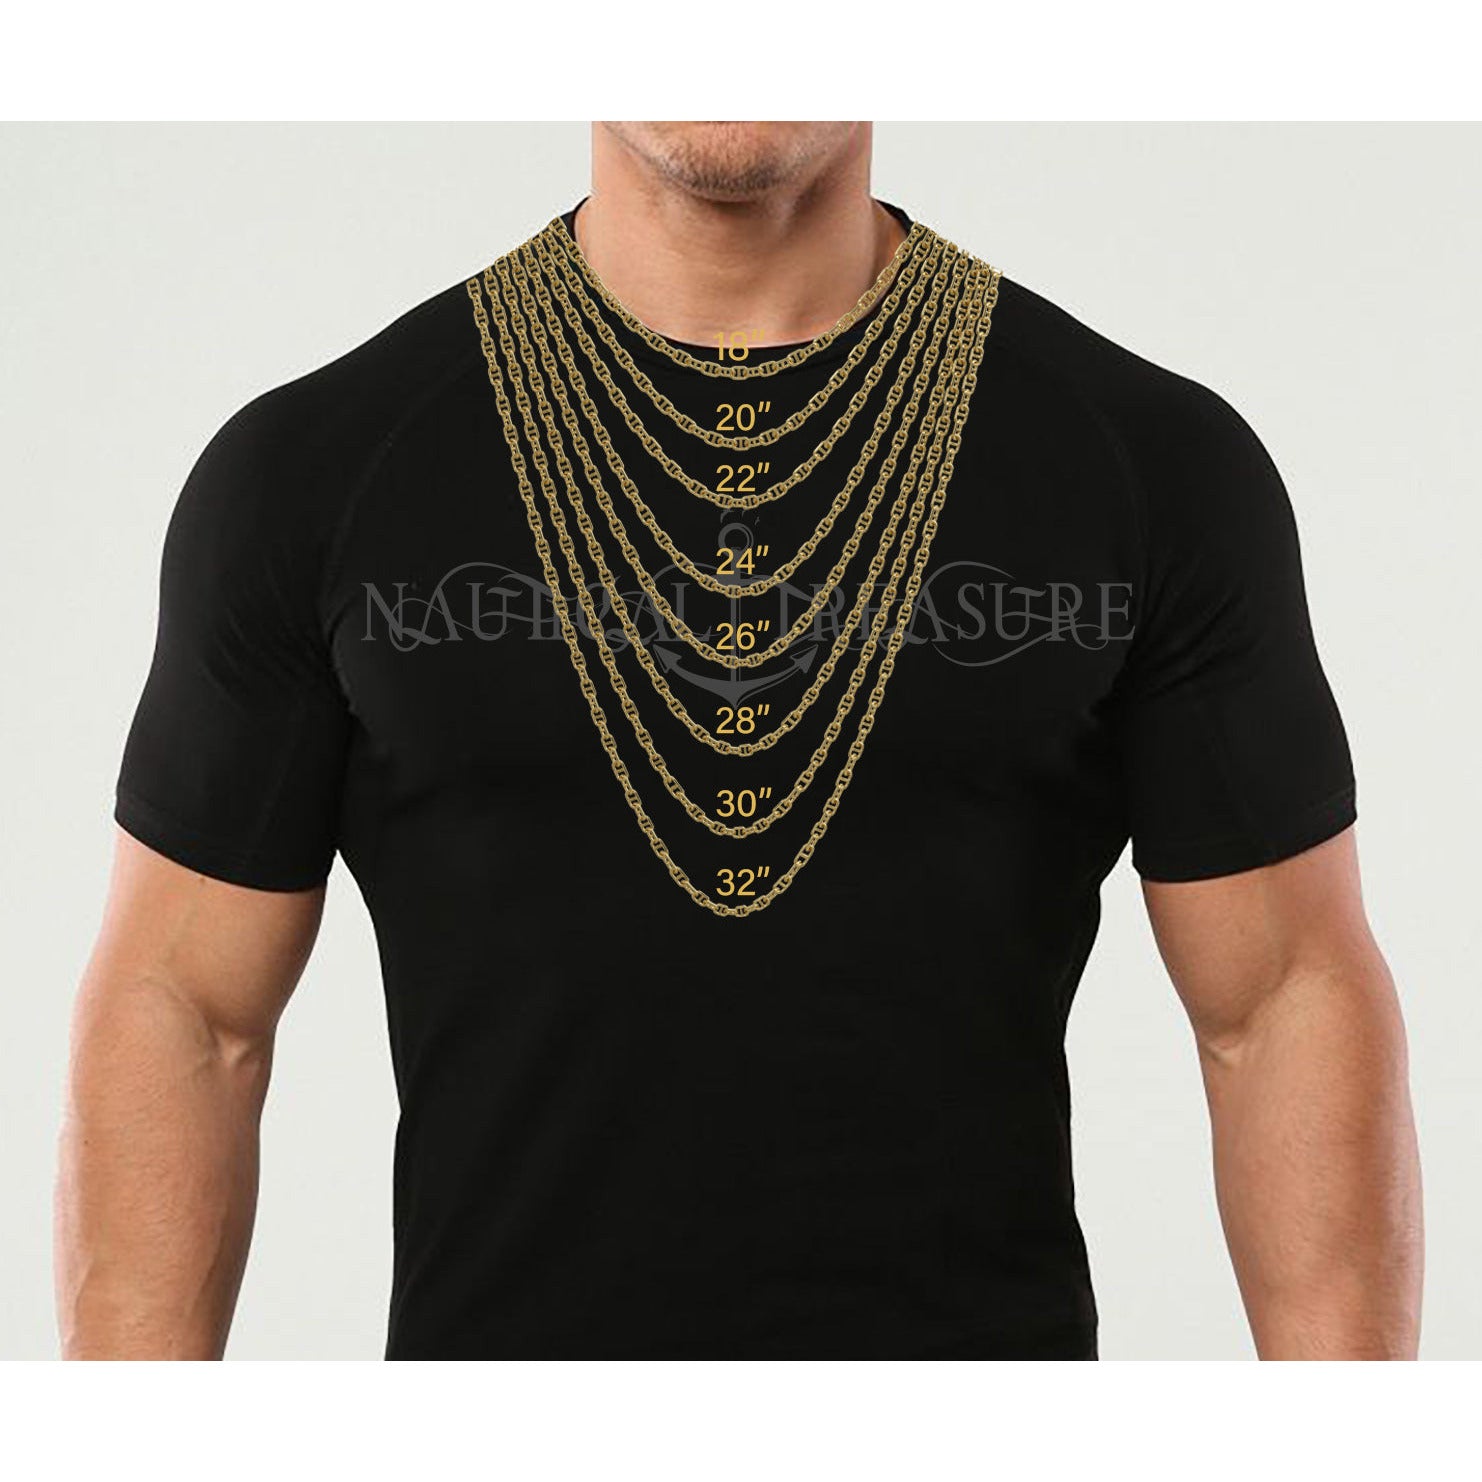  Man Model Wearing Nautical Treasure Jewelry Apparel Tshirt and Multiple Mariner Link Anchor Chains to illustrate Chain lengths offered from 18 inch to 32 inch